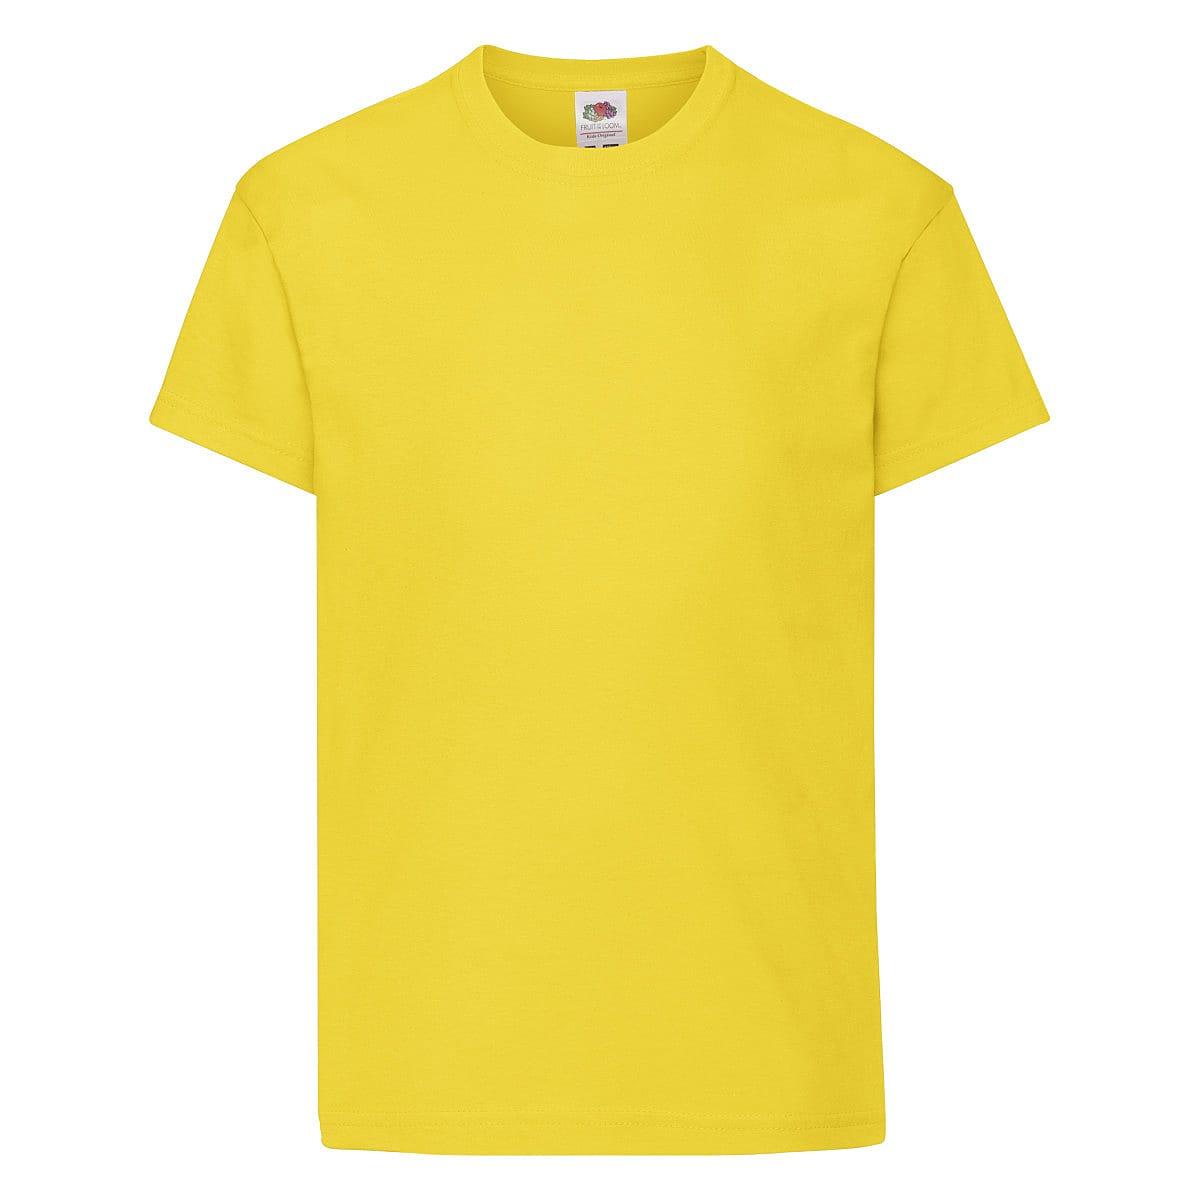 Fruit Of The Loom Kids Original T-Shirt in Yellow (Product Code: 61019)